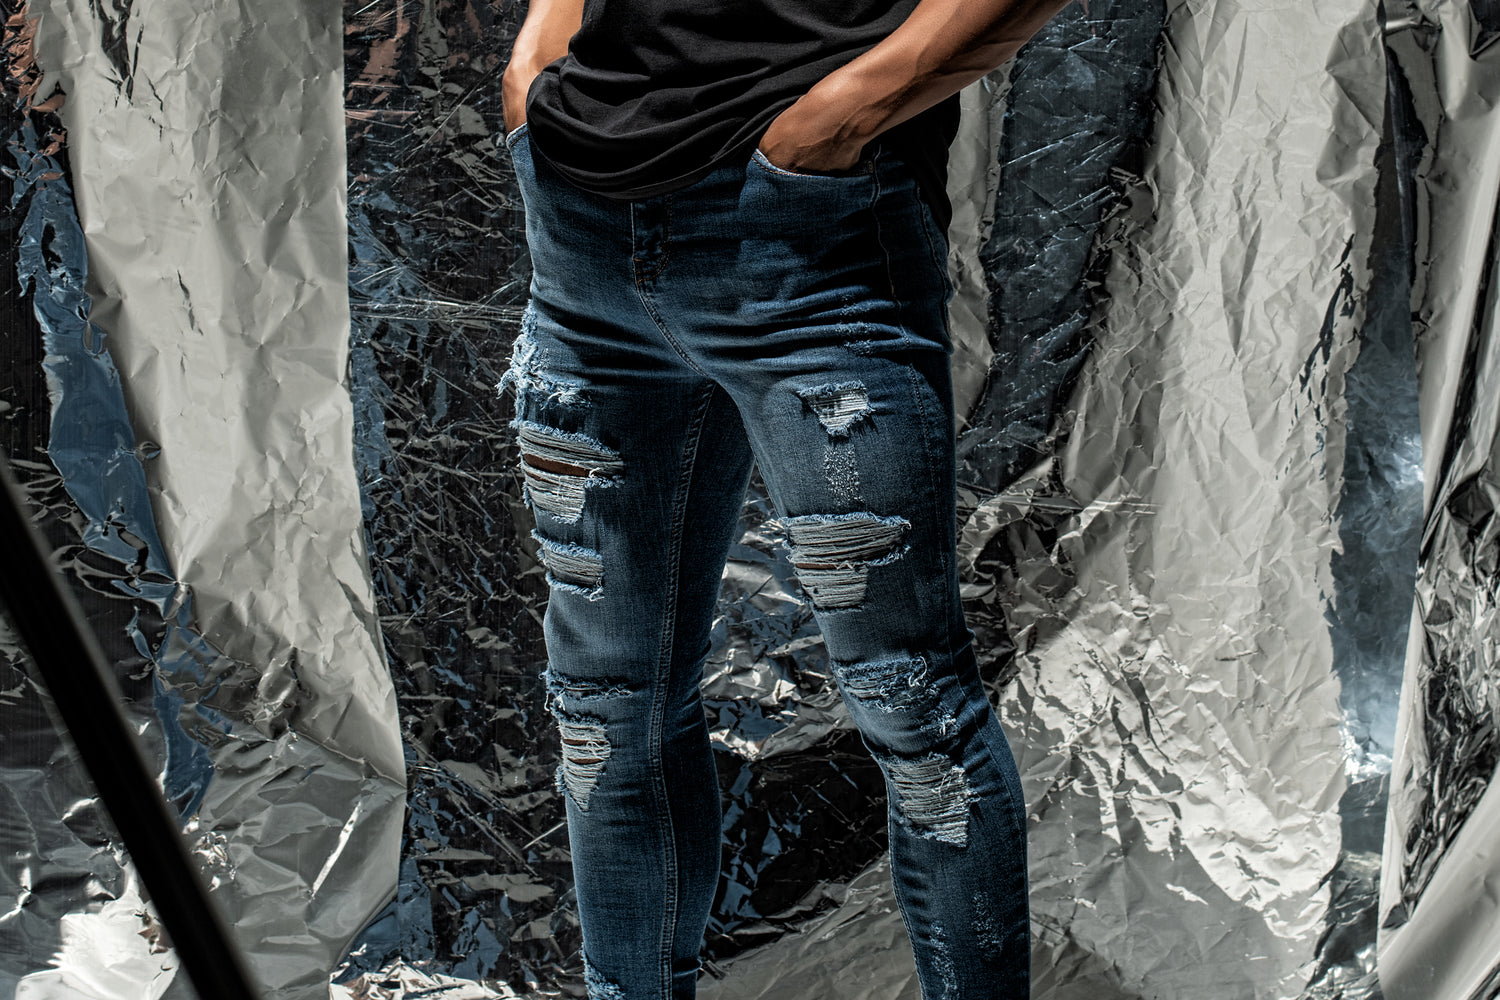 Denim Blue Mid Rise Ripped Jeans, Distressed Jeans